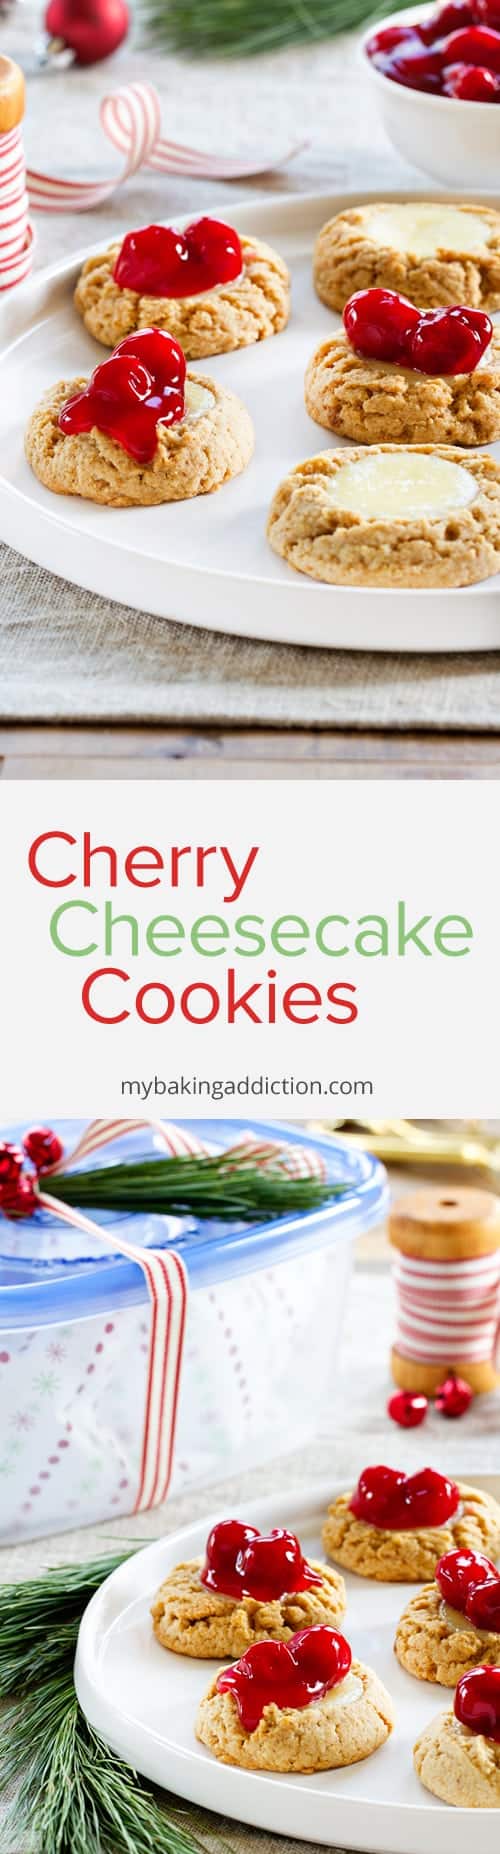 Cherry Cheesecake Cookies have all the flavors of traditional cheesecake - in cookie form. They're sure to become a new favorite!